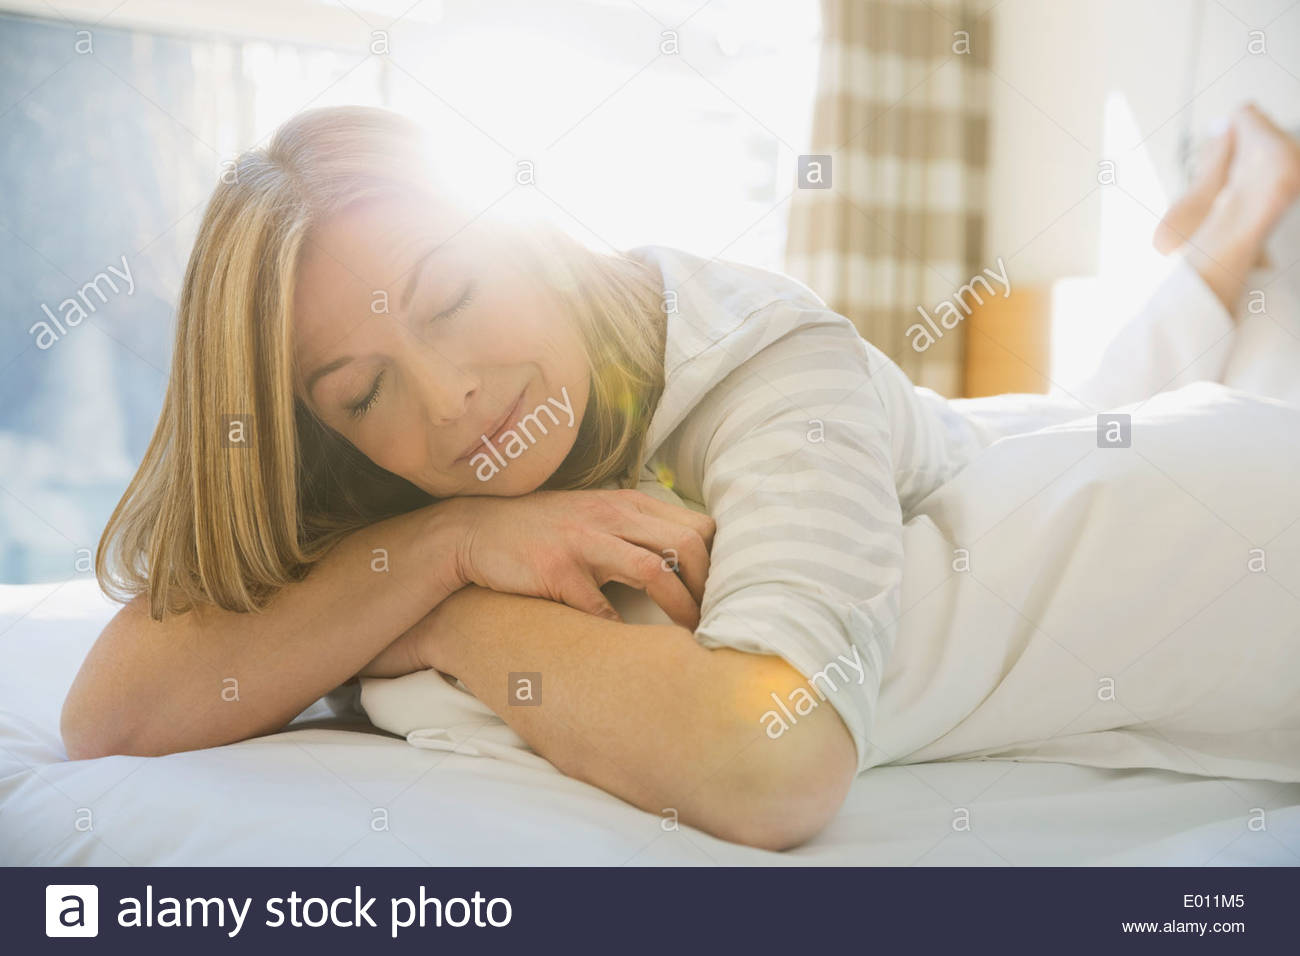 Woman napping on bed Stock Photo